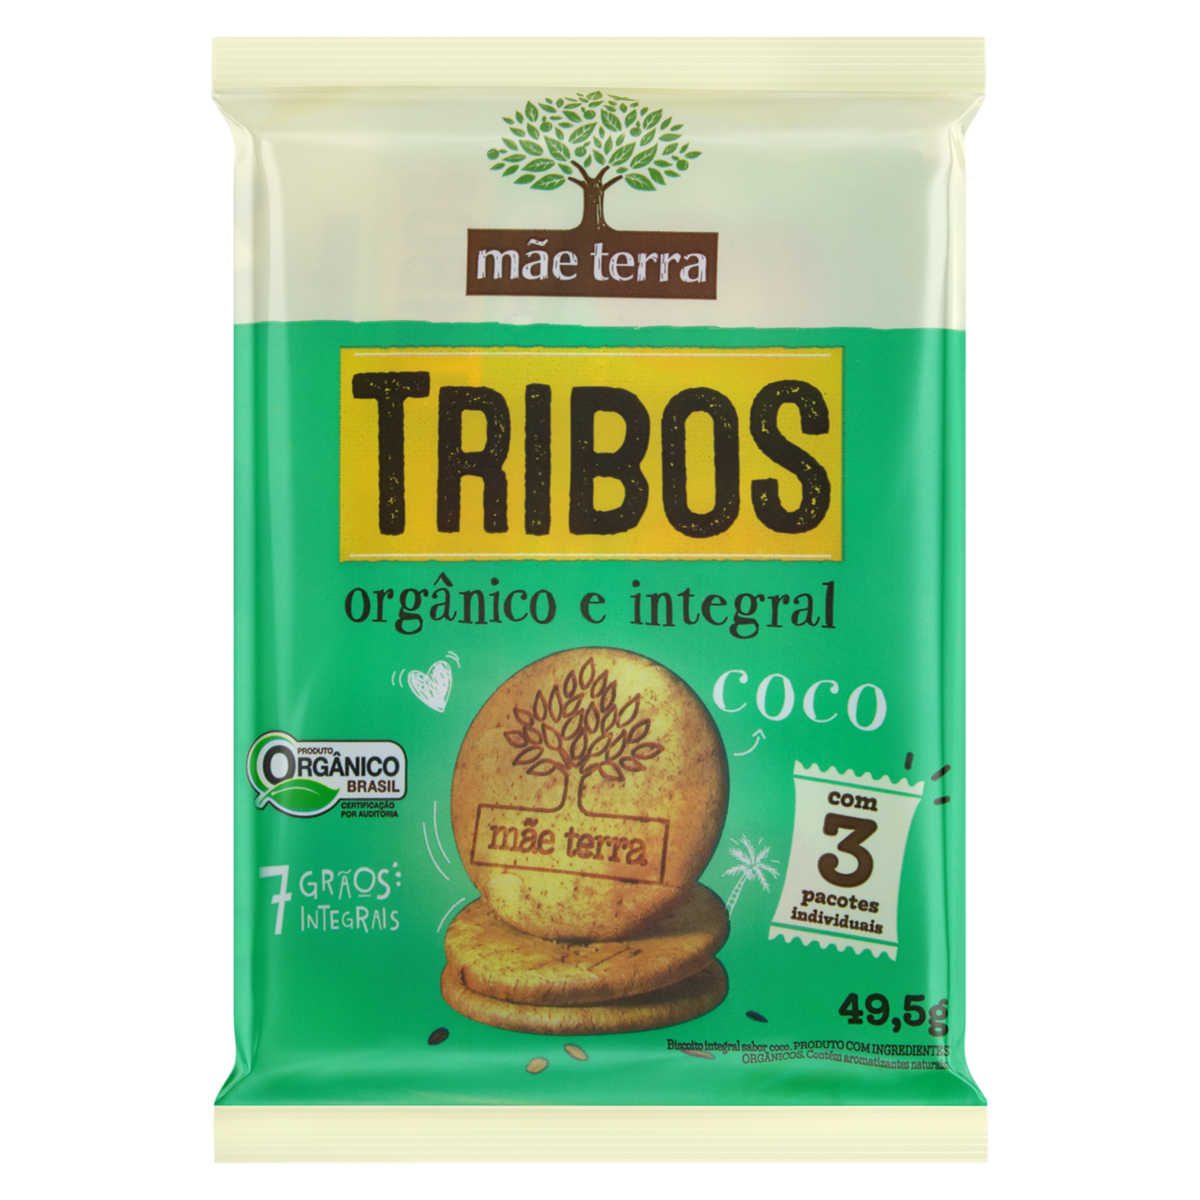 7896496917785 - PACK BISCOITO INTEGRAL ORGÂNICO COCO MÃE TERRA TRIBOS PACOTE 49,5G 3 UNIDADES